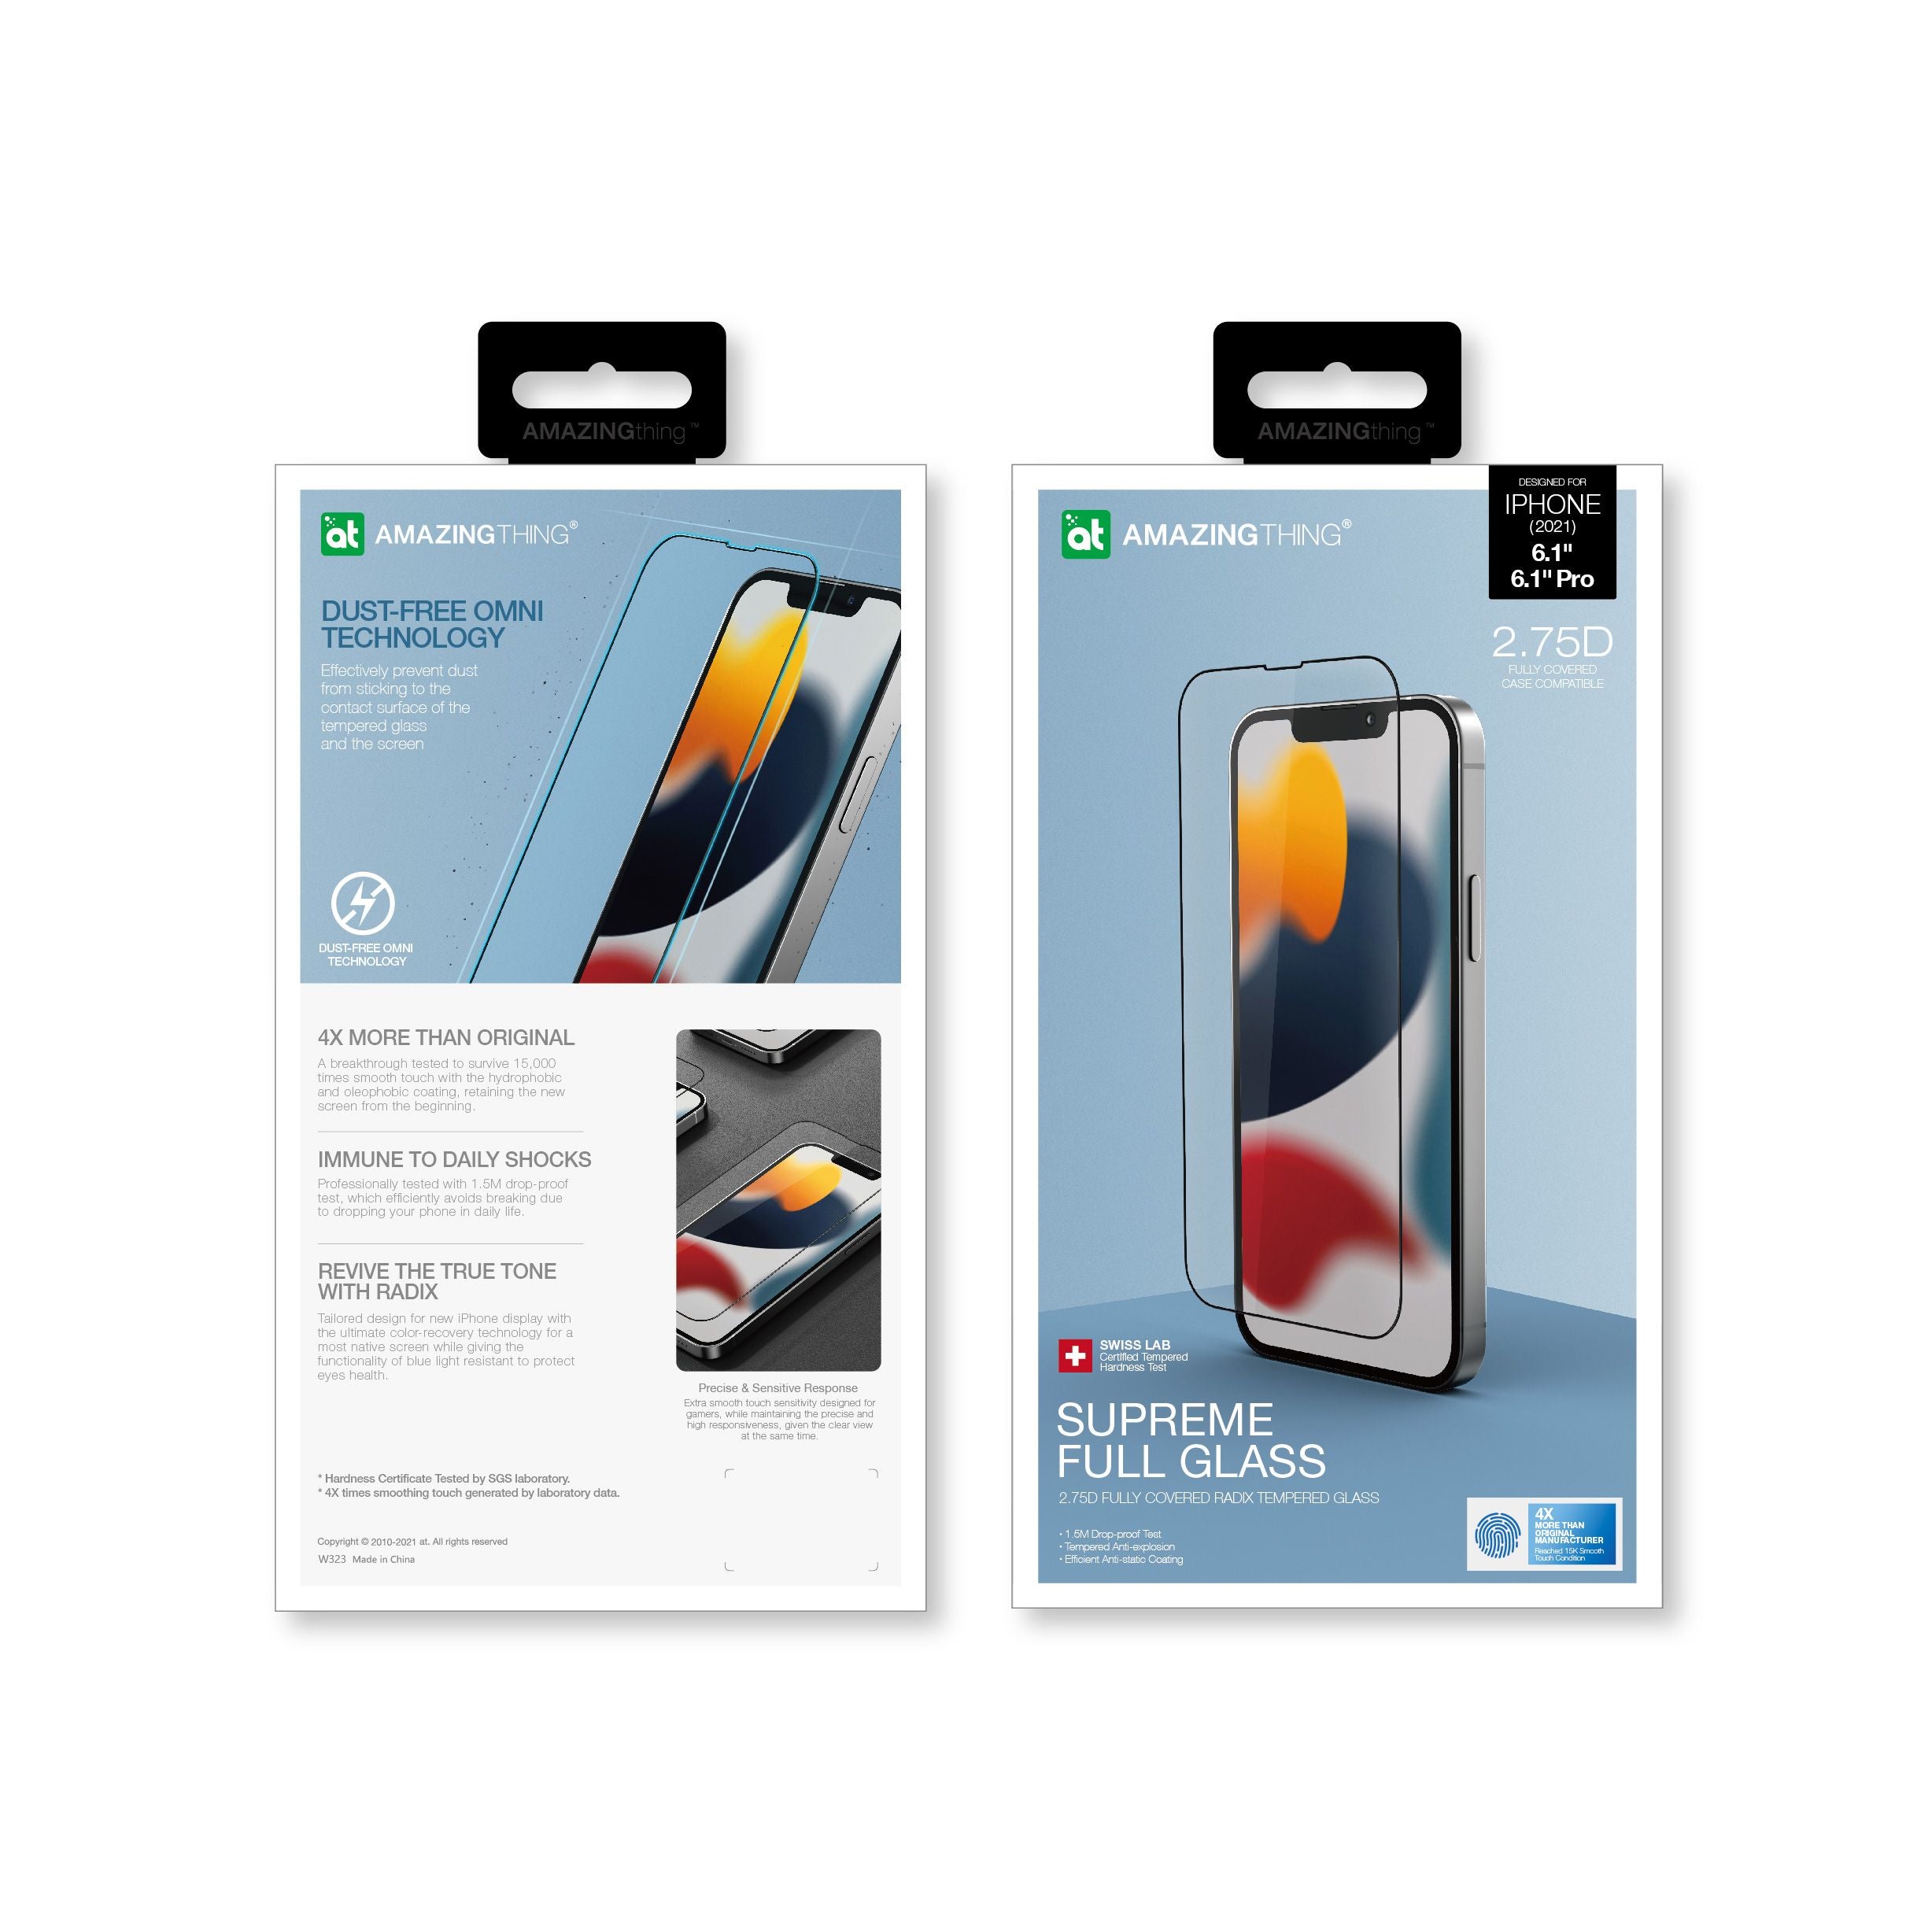 AMAZINGthing 2.75D Fully Covered Radix Tempered Glass Screen Protector - iPhone 13 & 13 Pro - Clear